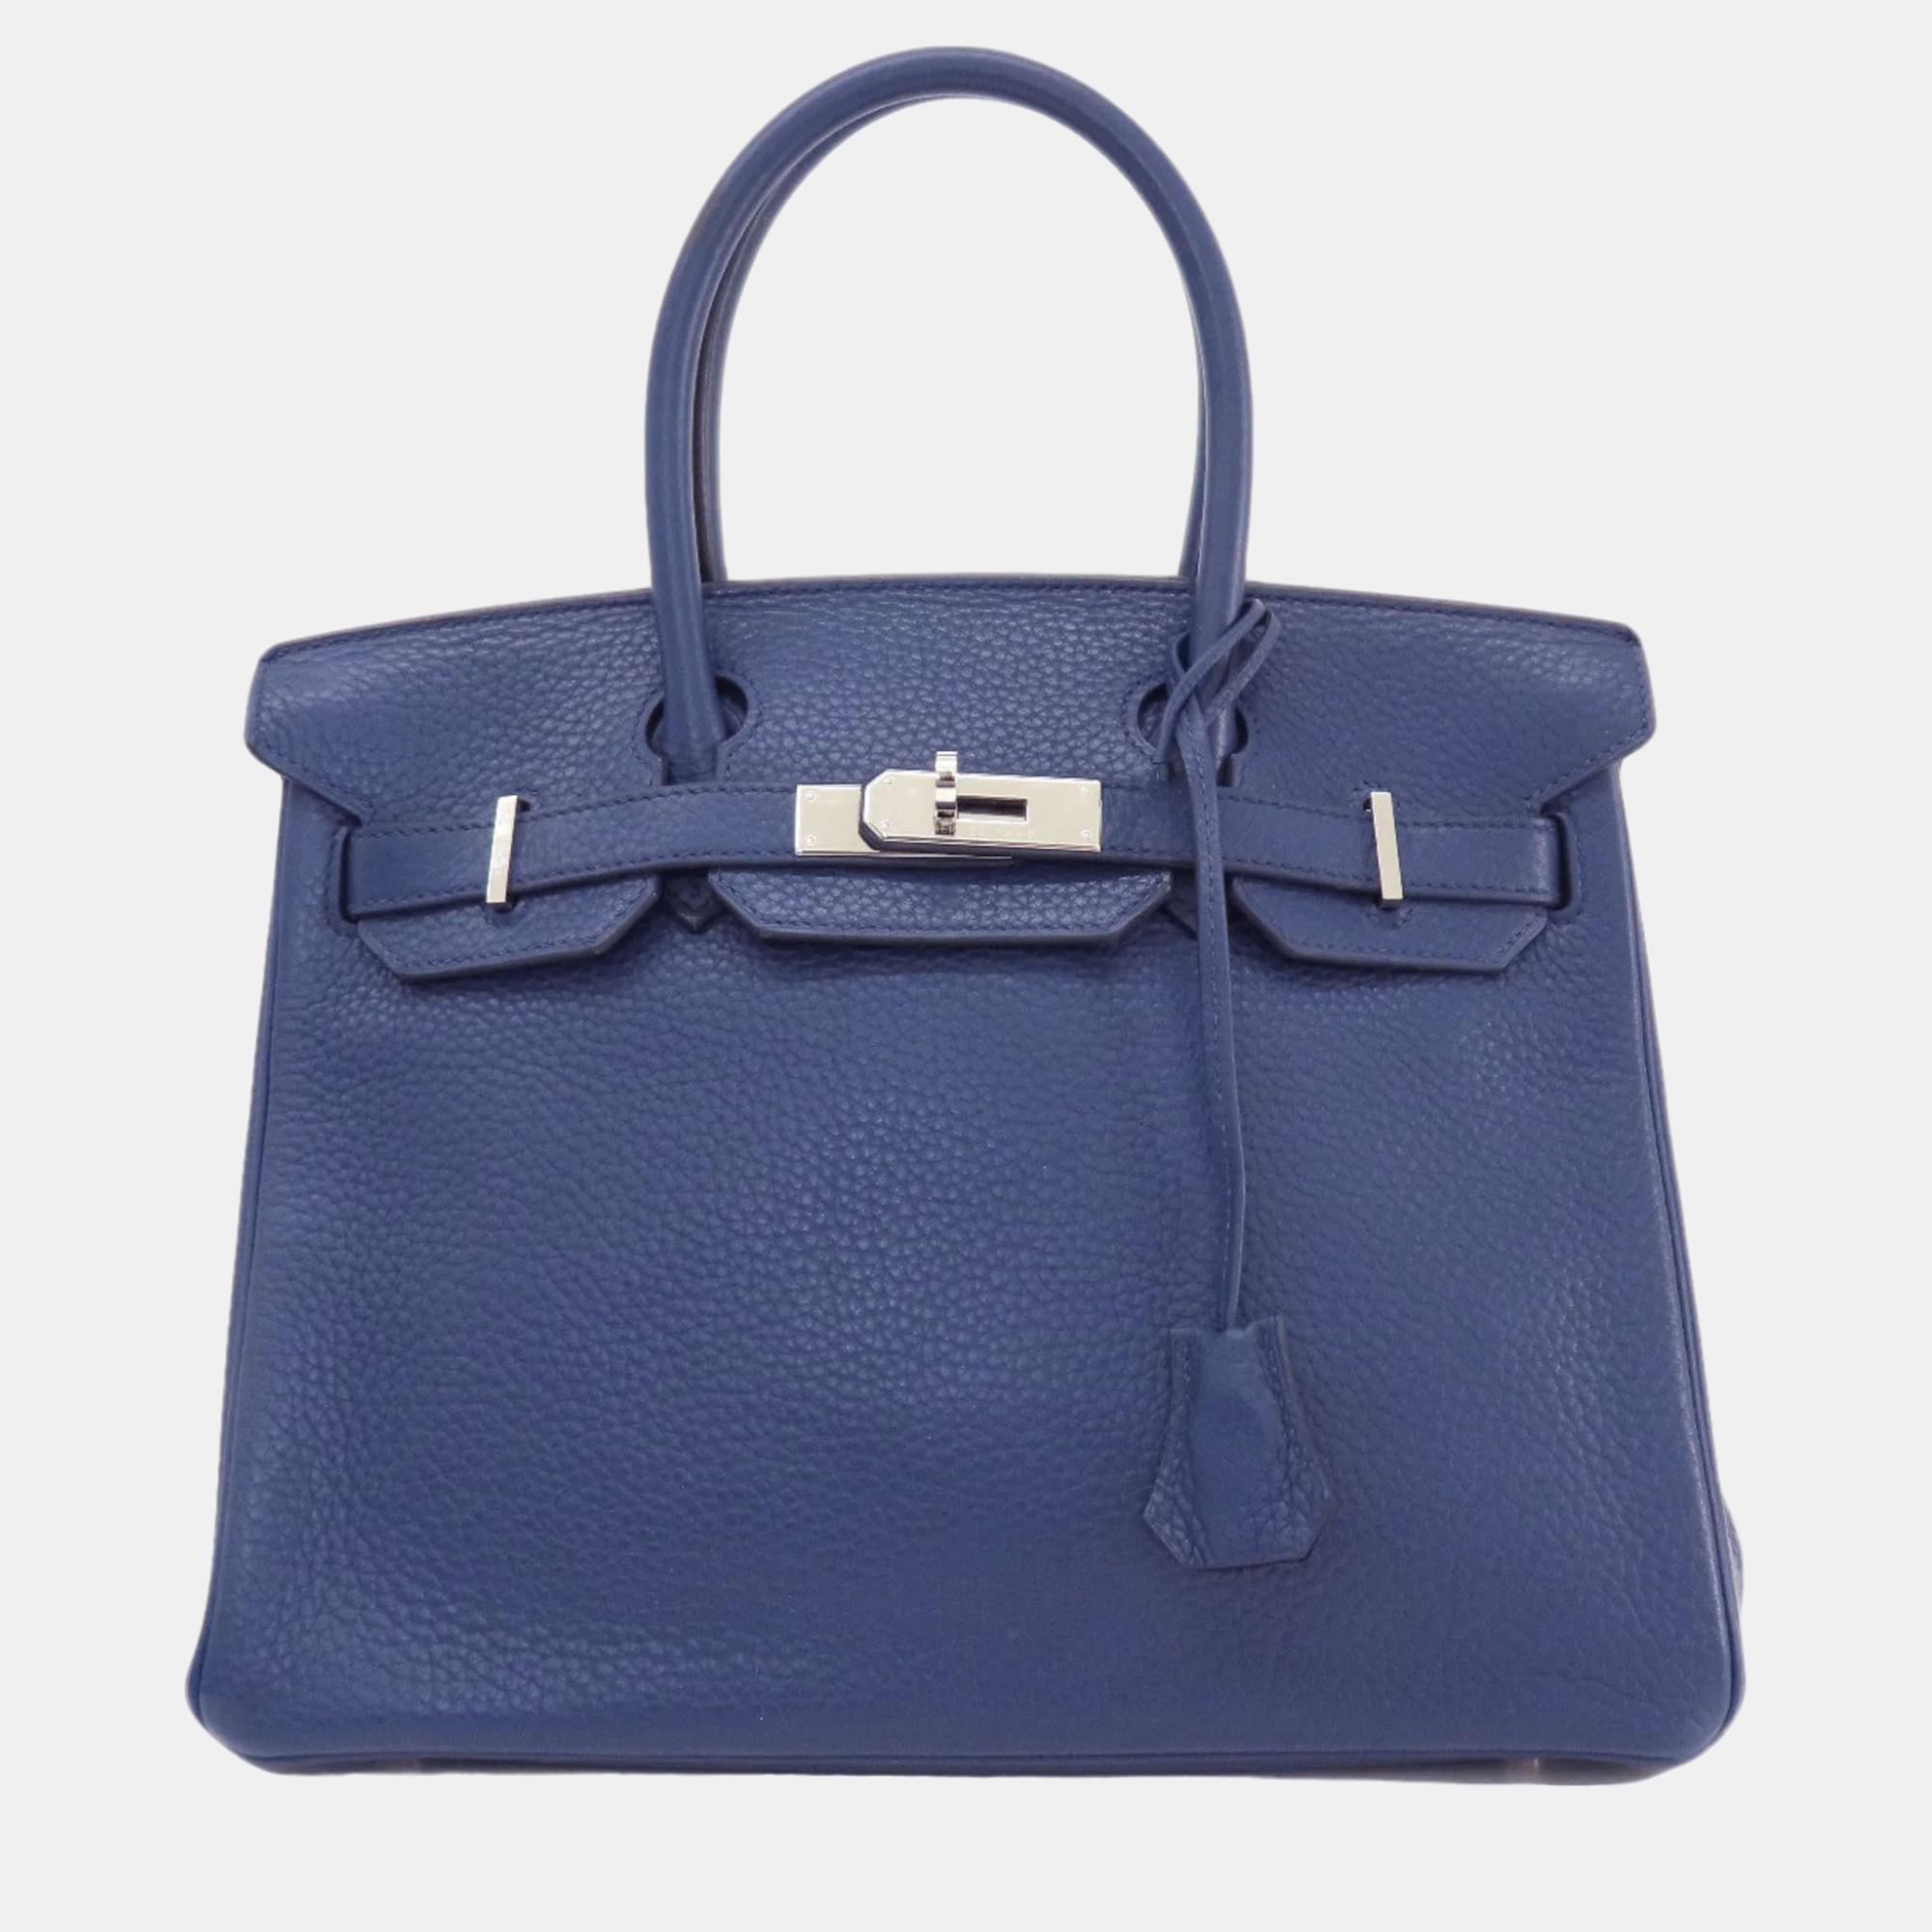 Hermes blue taurillon clemence leather birkin 30 tote bag